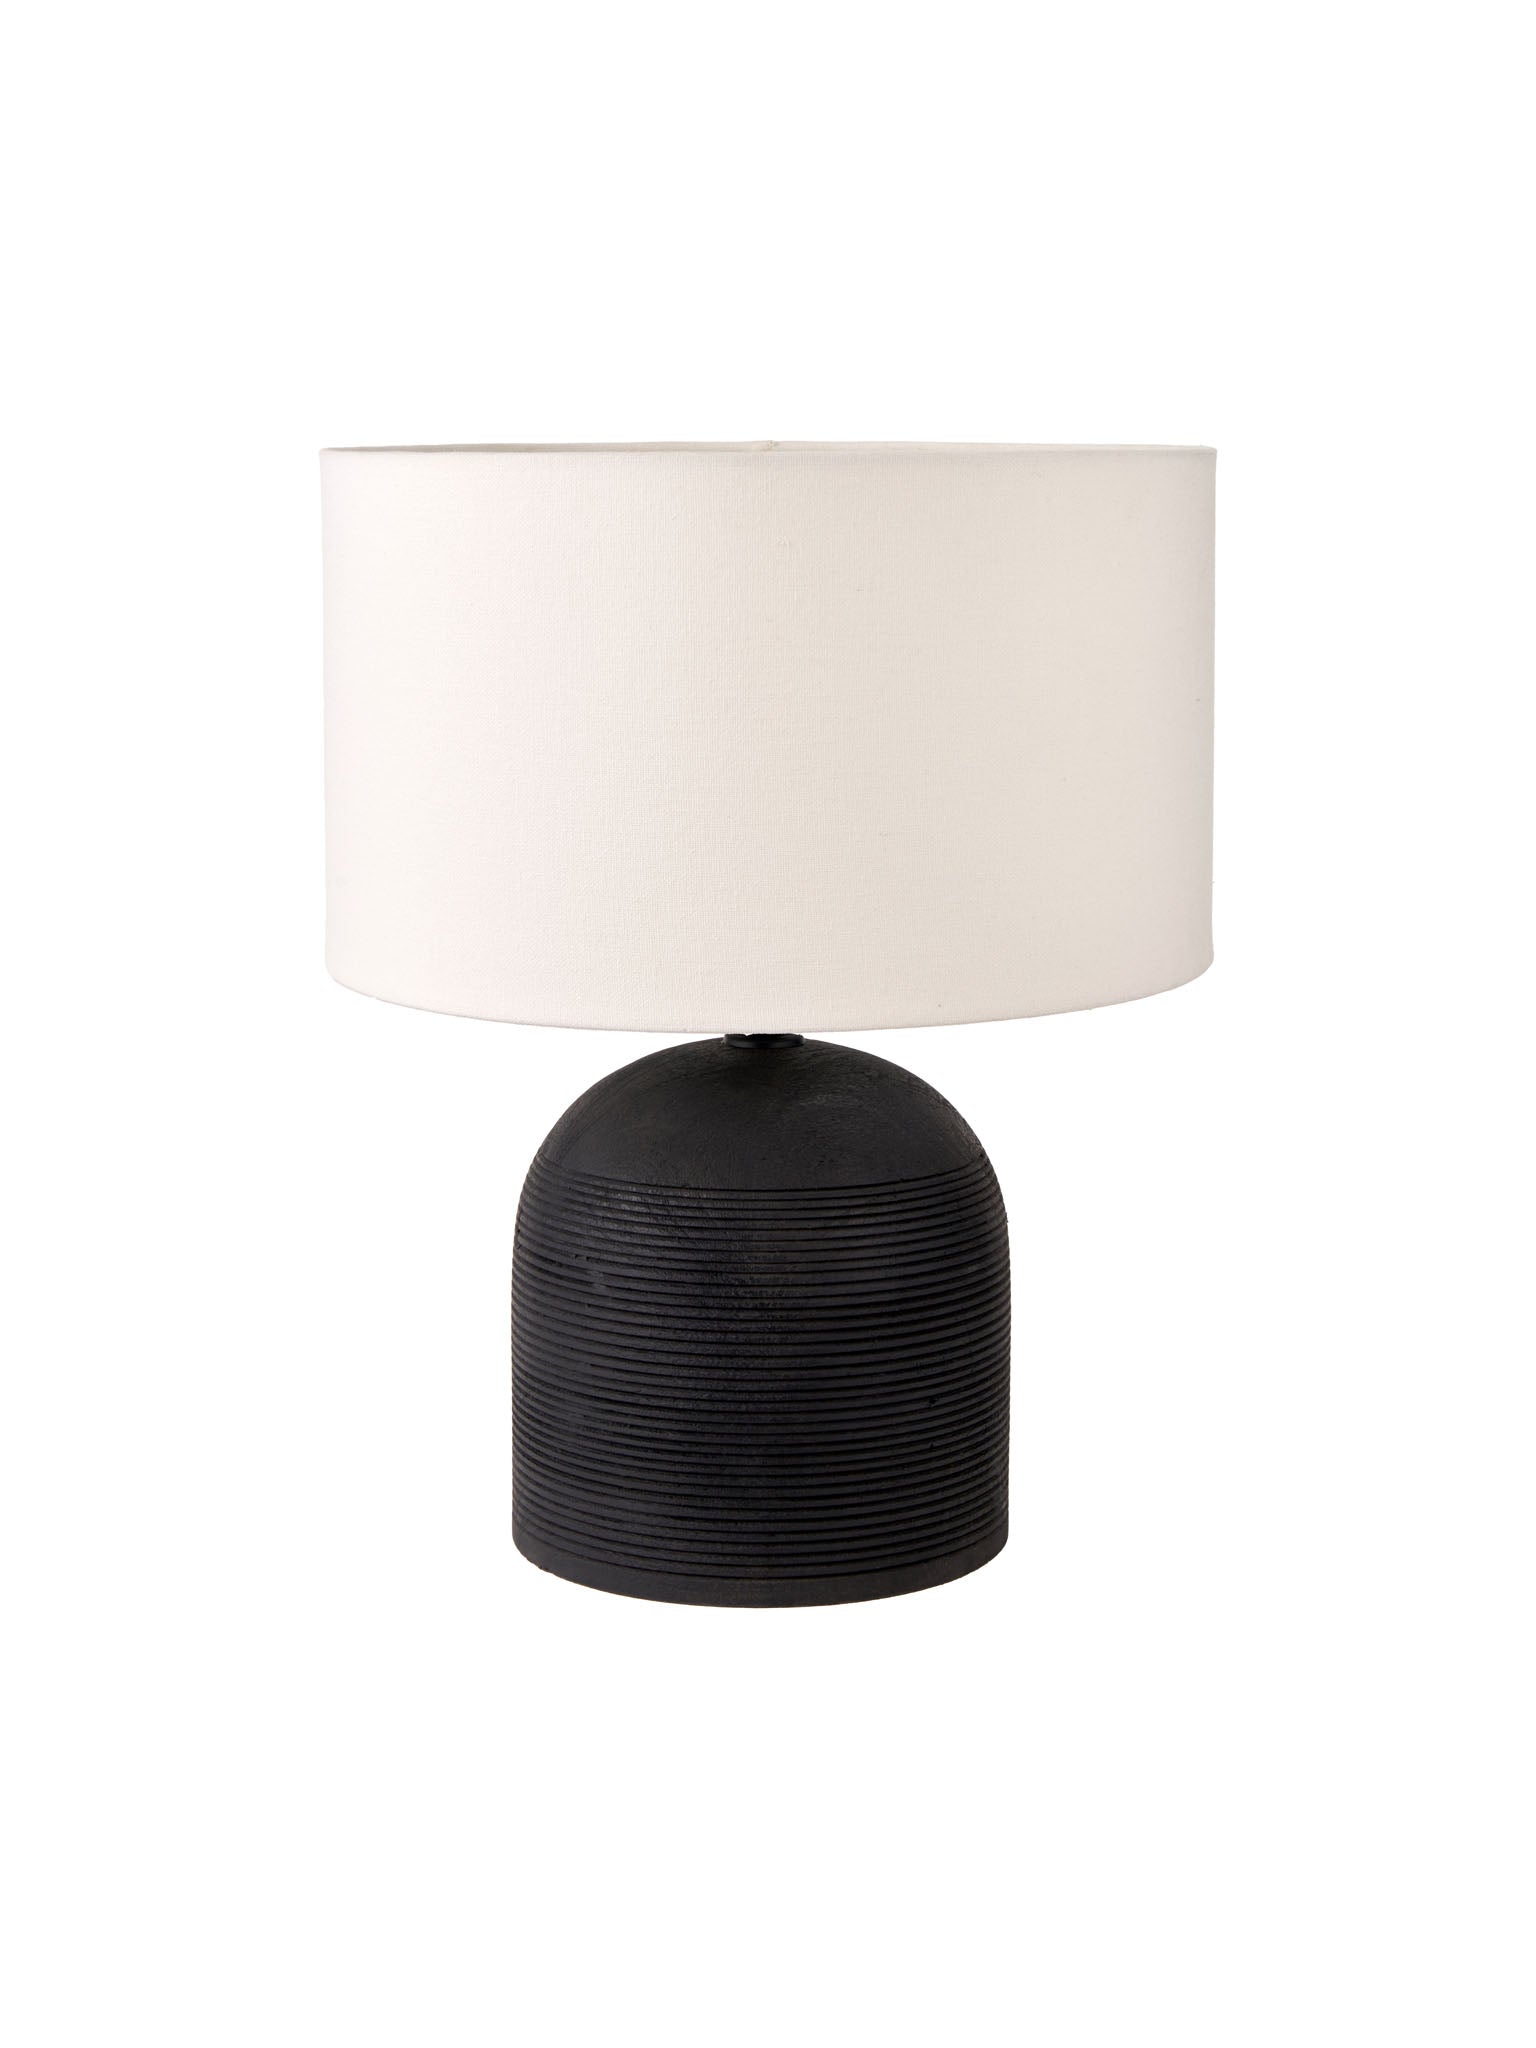 Jannu Black Wooden Grooved Table Lamp